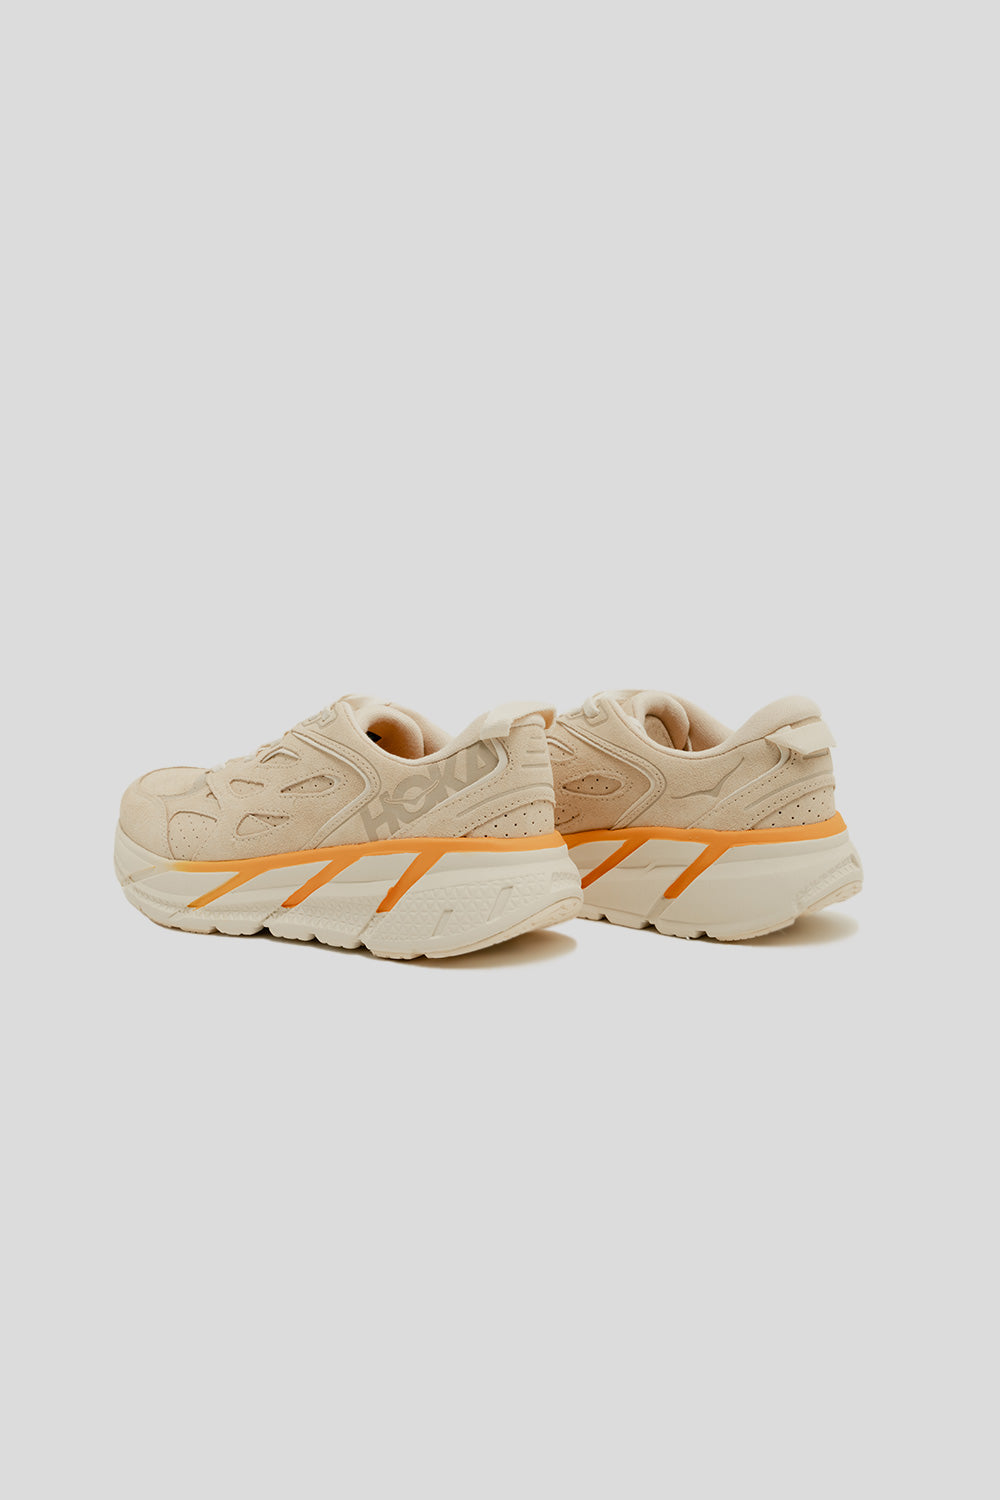 WMNS-Clifton-L-Suede-Short-Bread-Radiant-Yellow